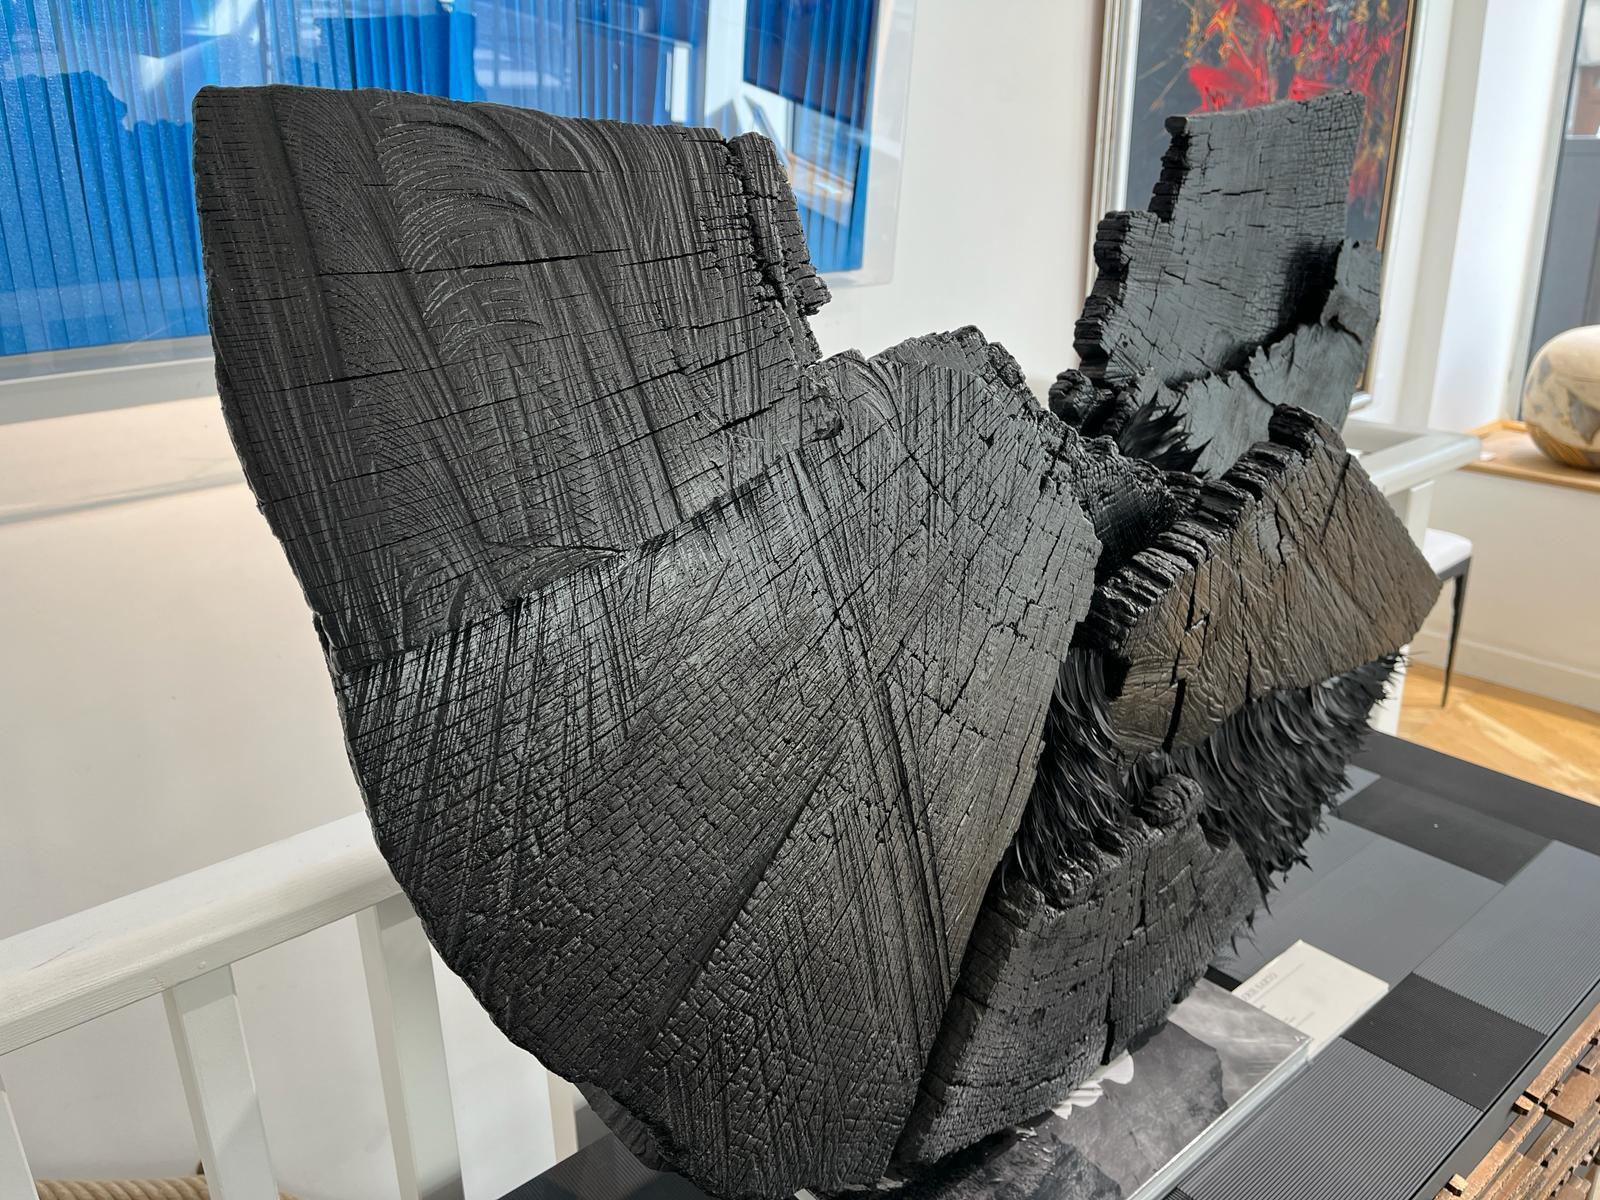 Renaud Bihi
Untitled
Bois brûlé et plumes  Burnt wood and feathers
107 x 20 x 66 cm  42.1 x 7.8 x 25.9 in.

Renaud Bihi, an artist of materials and a man of contrasts, has had a singular career in the art world. Once a well-known florist, he has